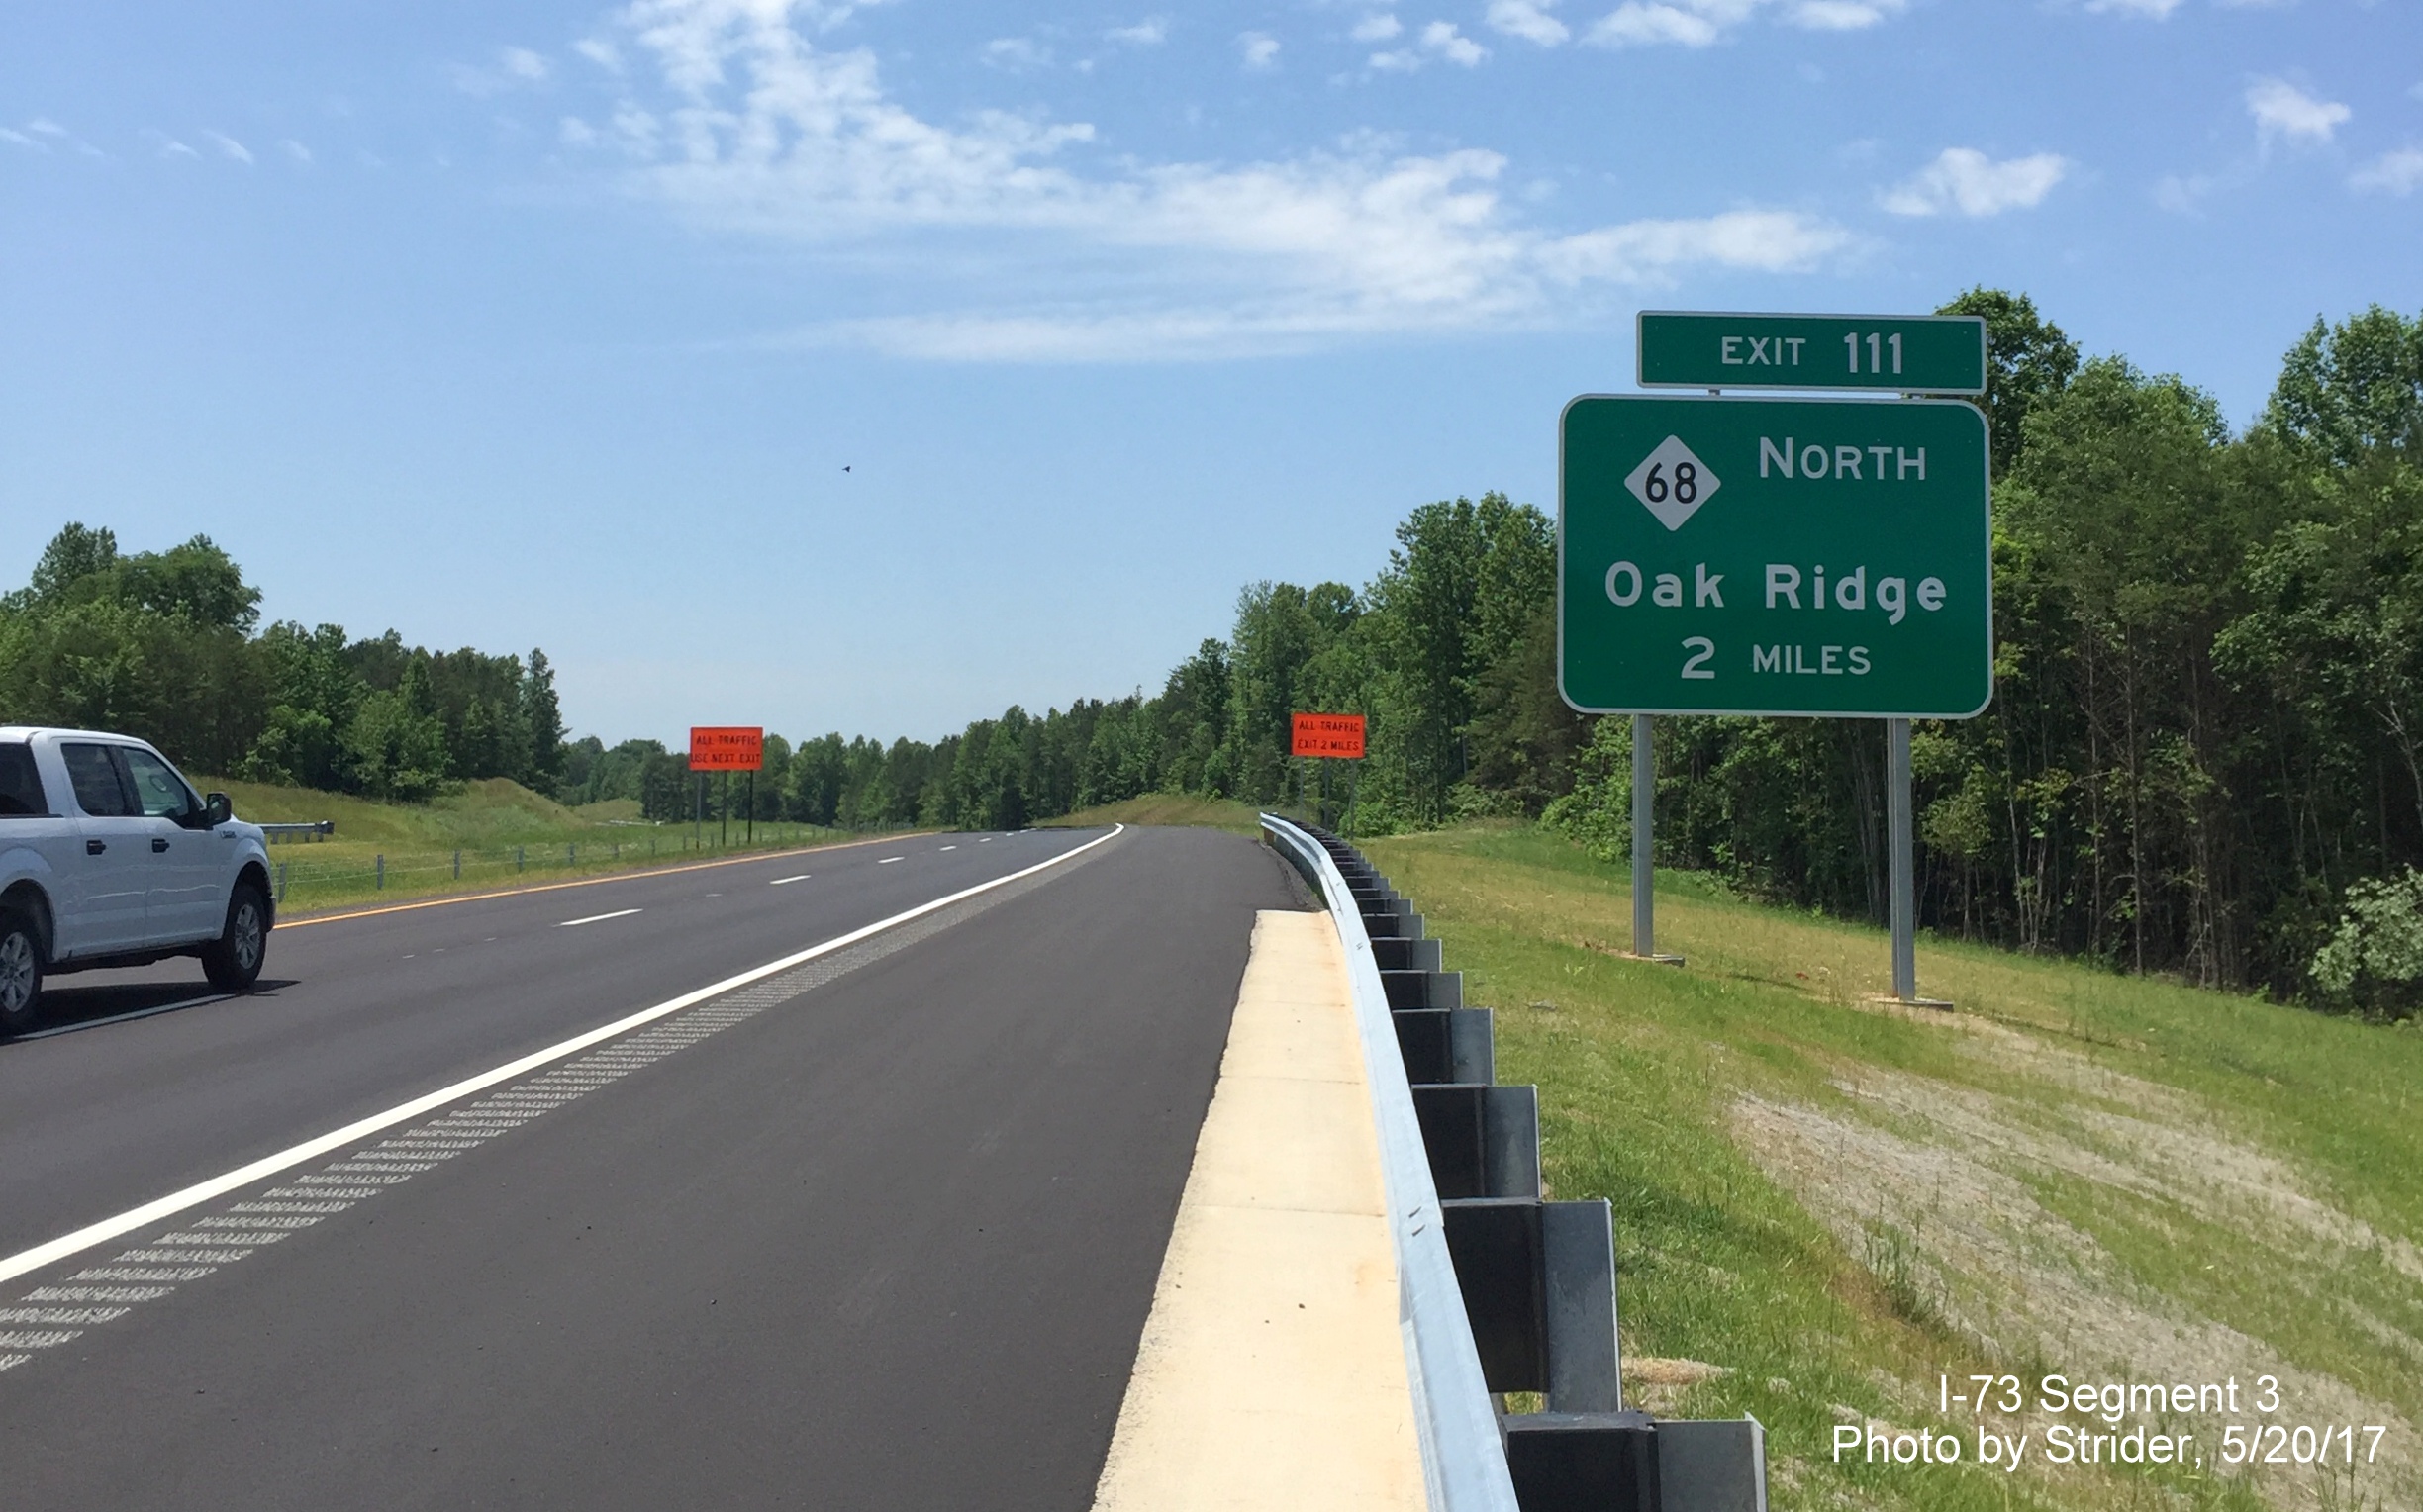 Image taken of first exit sign for NC 68 on newly opened I-73 South highway, by Strider